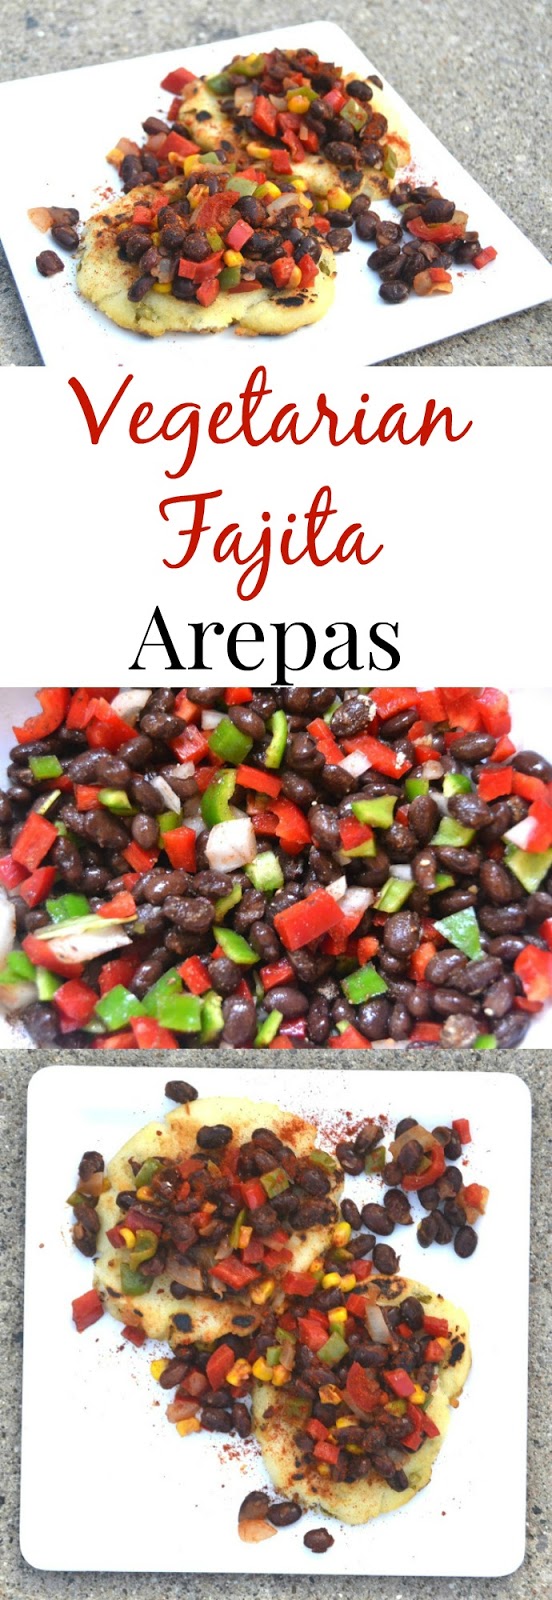 These vegetarian fajita arepas are Venezuelan flatbreads topped with black beans and fajita vegetables for a delicious and healthy meal! www.nutritionistreviews.com